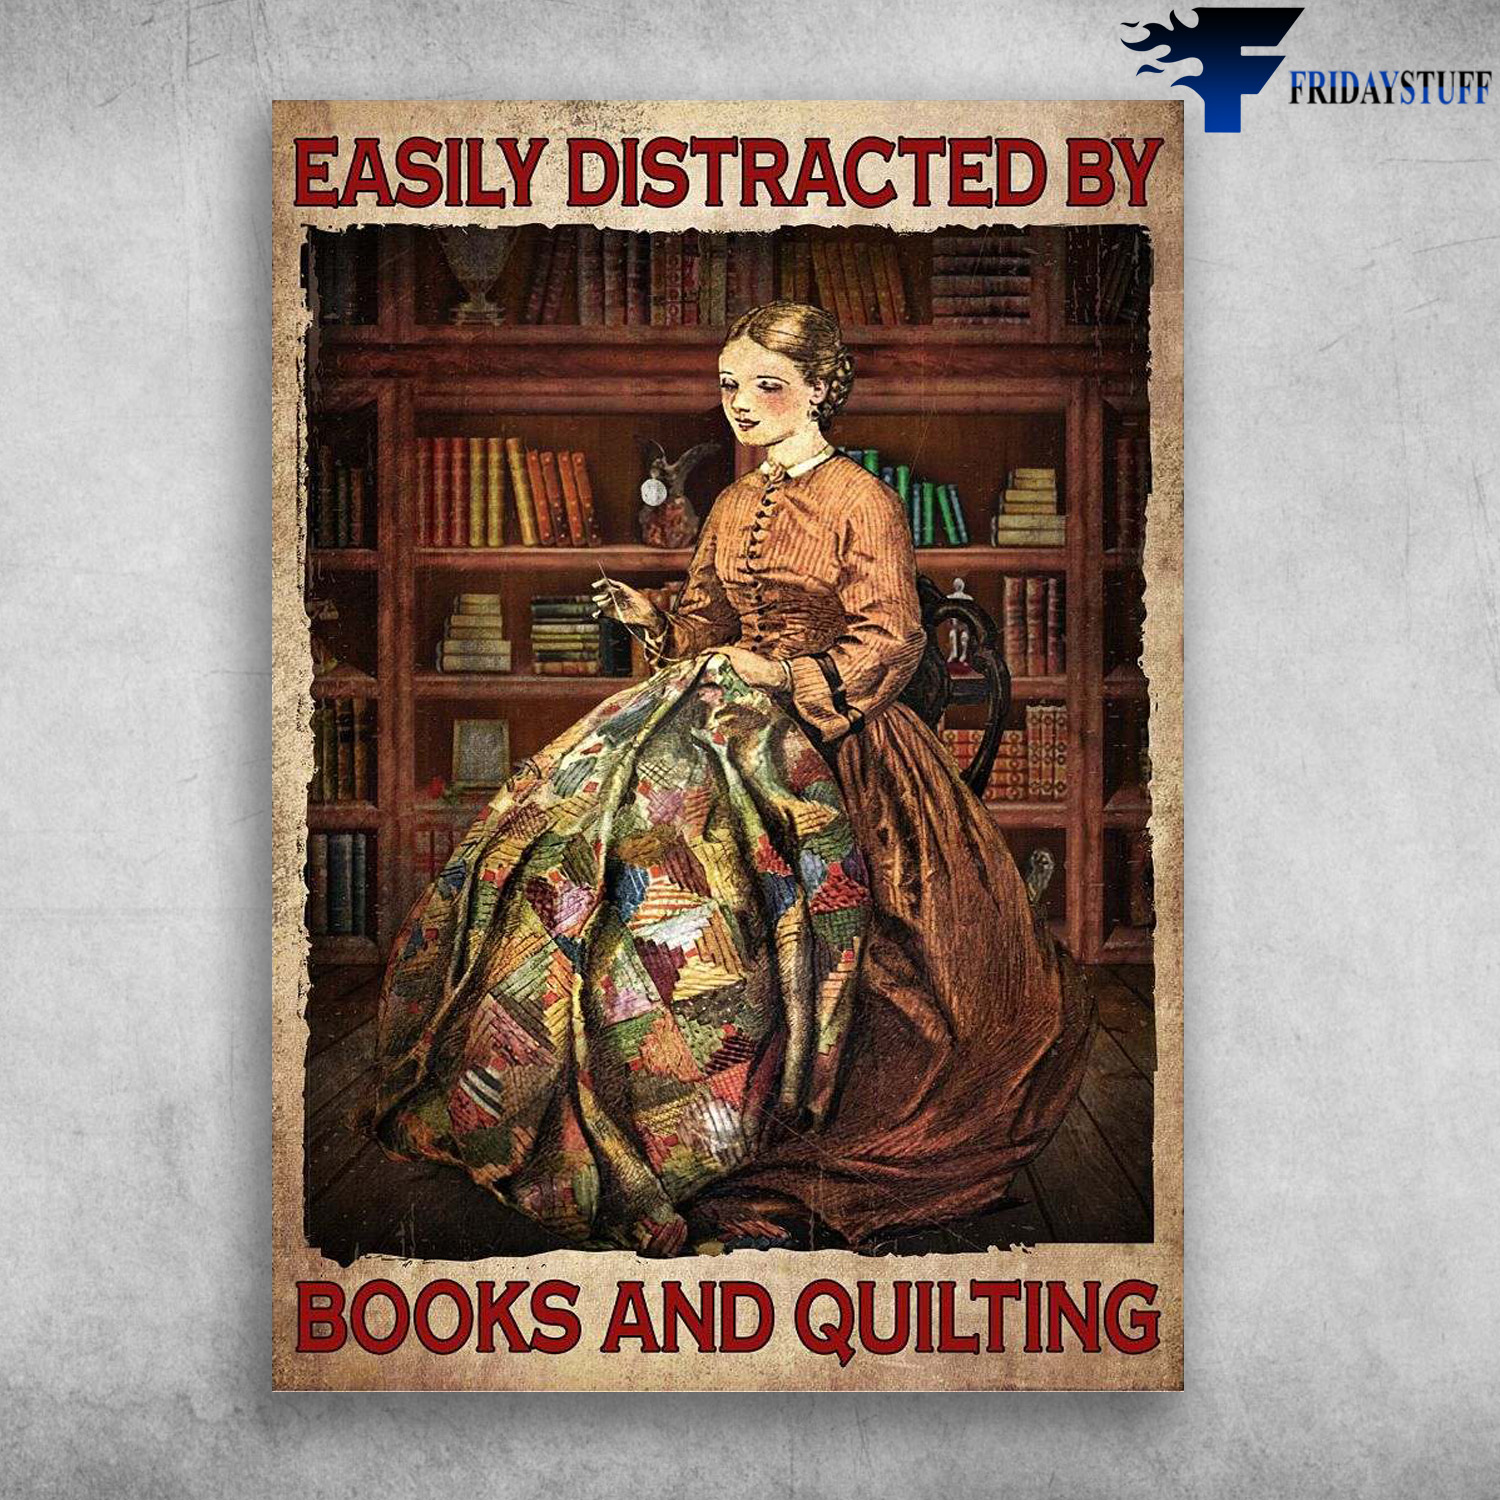 Lady Quilting - Easily Distracted By, Books And Quilting - FridayStuff